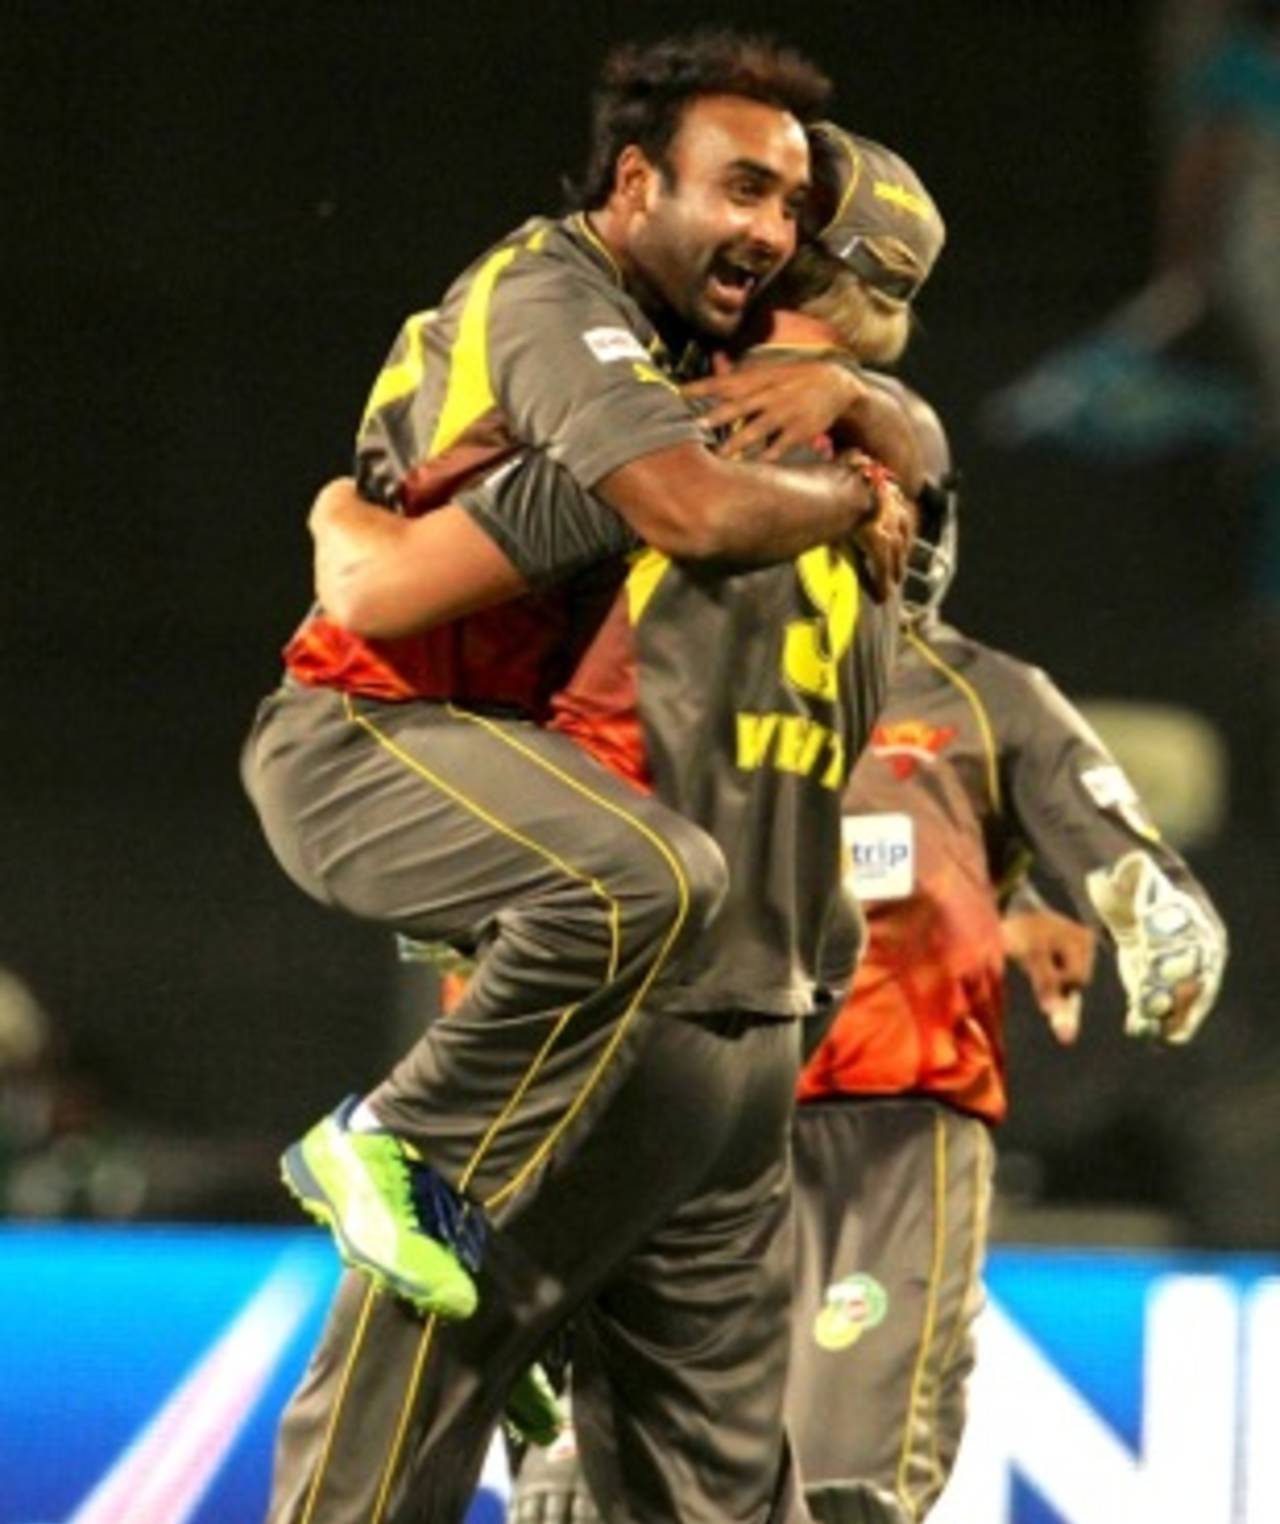 Amit Mishra leaps on to Cameron White after his hat-trick, Pune Warriors v Sunrisers Hyderabad, IPL, Pune, April 17, 2013